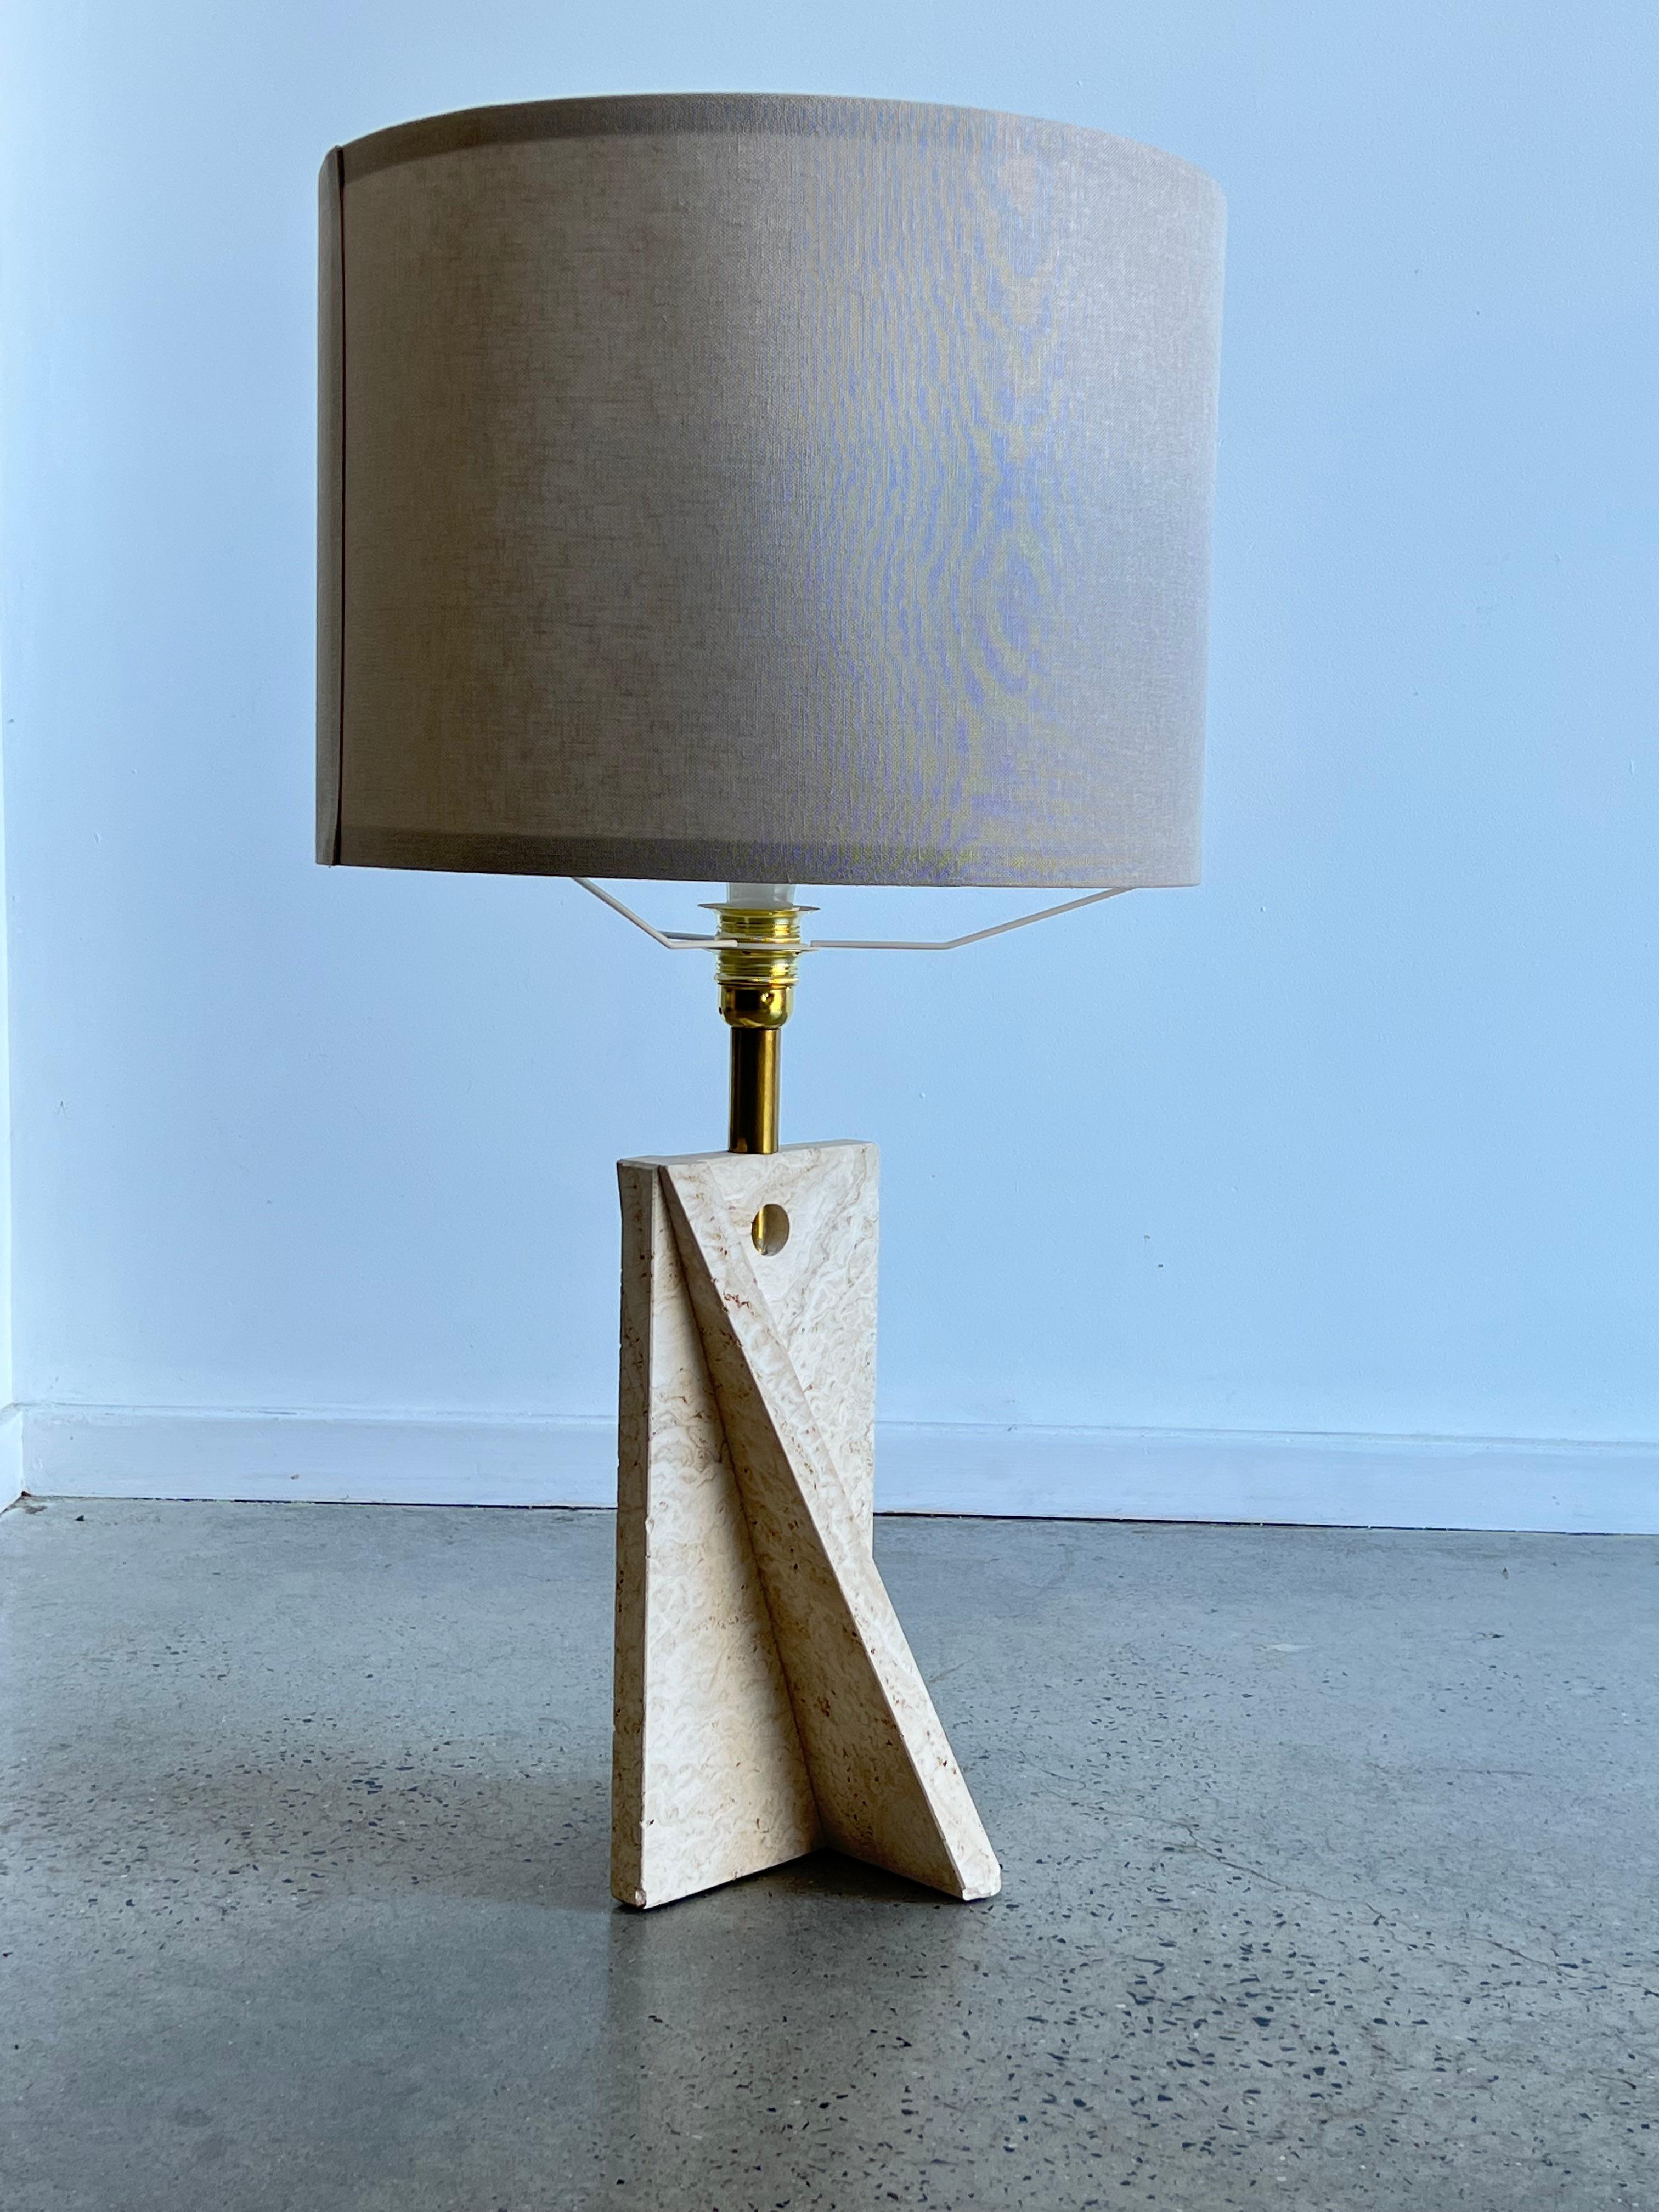 Travertine Italian modernist triangular table lamp by fratelli Mannelli 1970.
Brass top light bulb holder and curved travertine base.
Wiring completely restored in gold could cables and switch.
